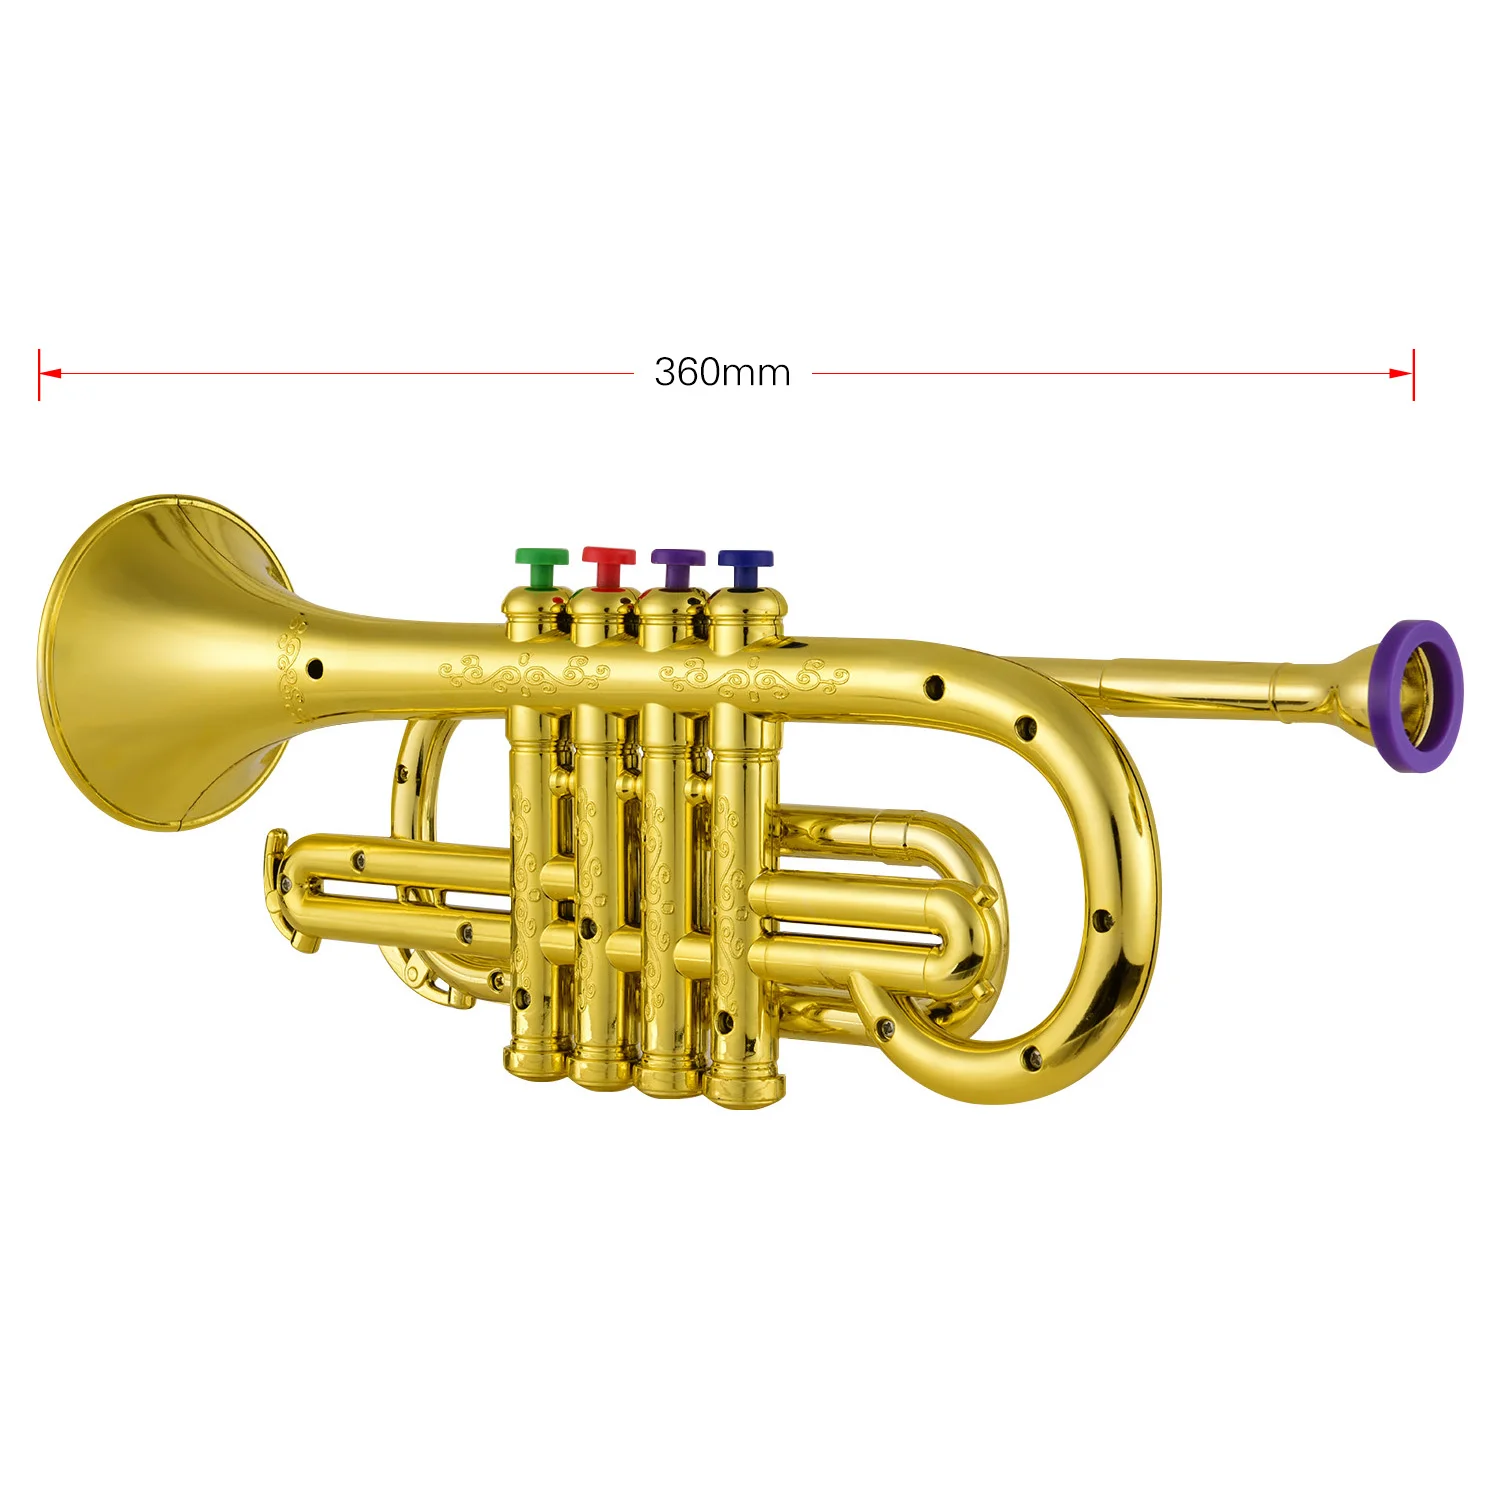 Metal Plated Trumpet HIGH QUALITY Music Toy for Children Kids BEST TOP XMAS Gift 